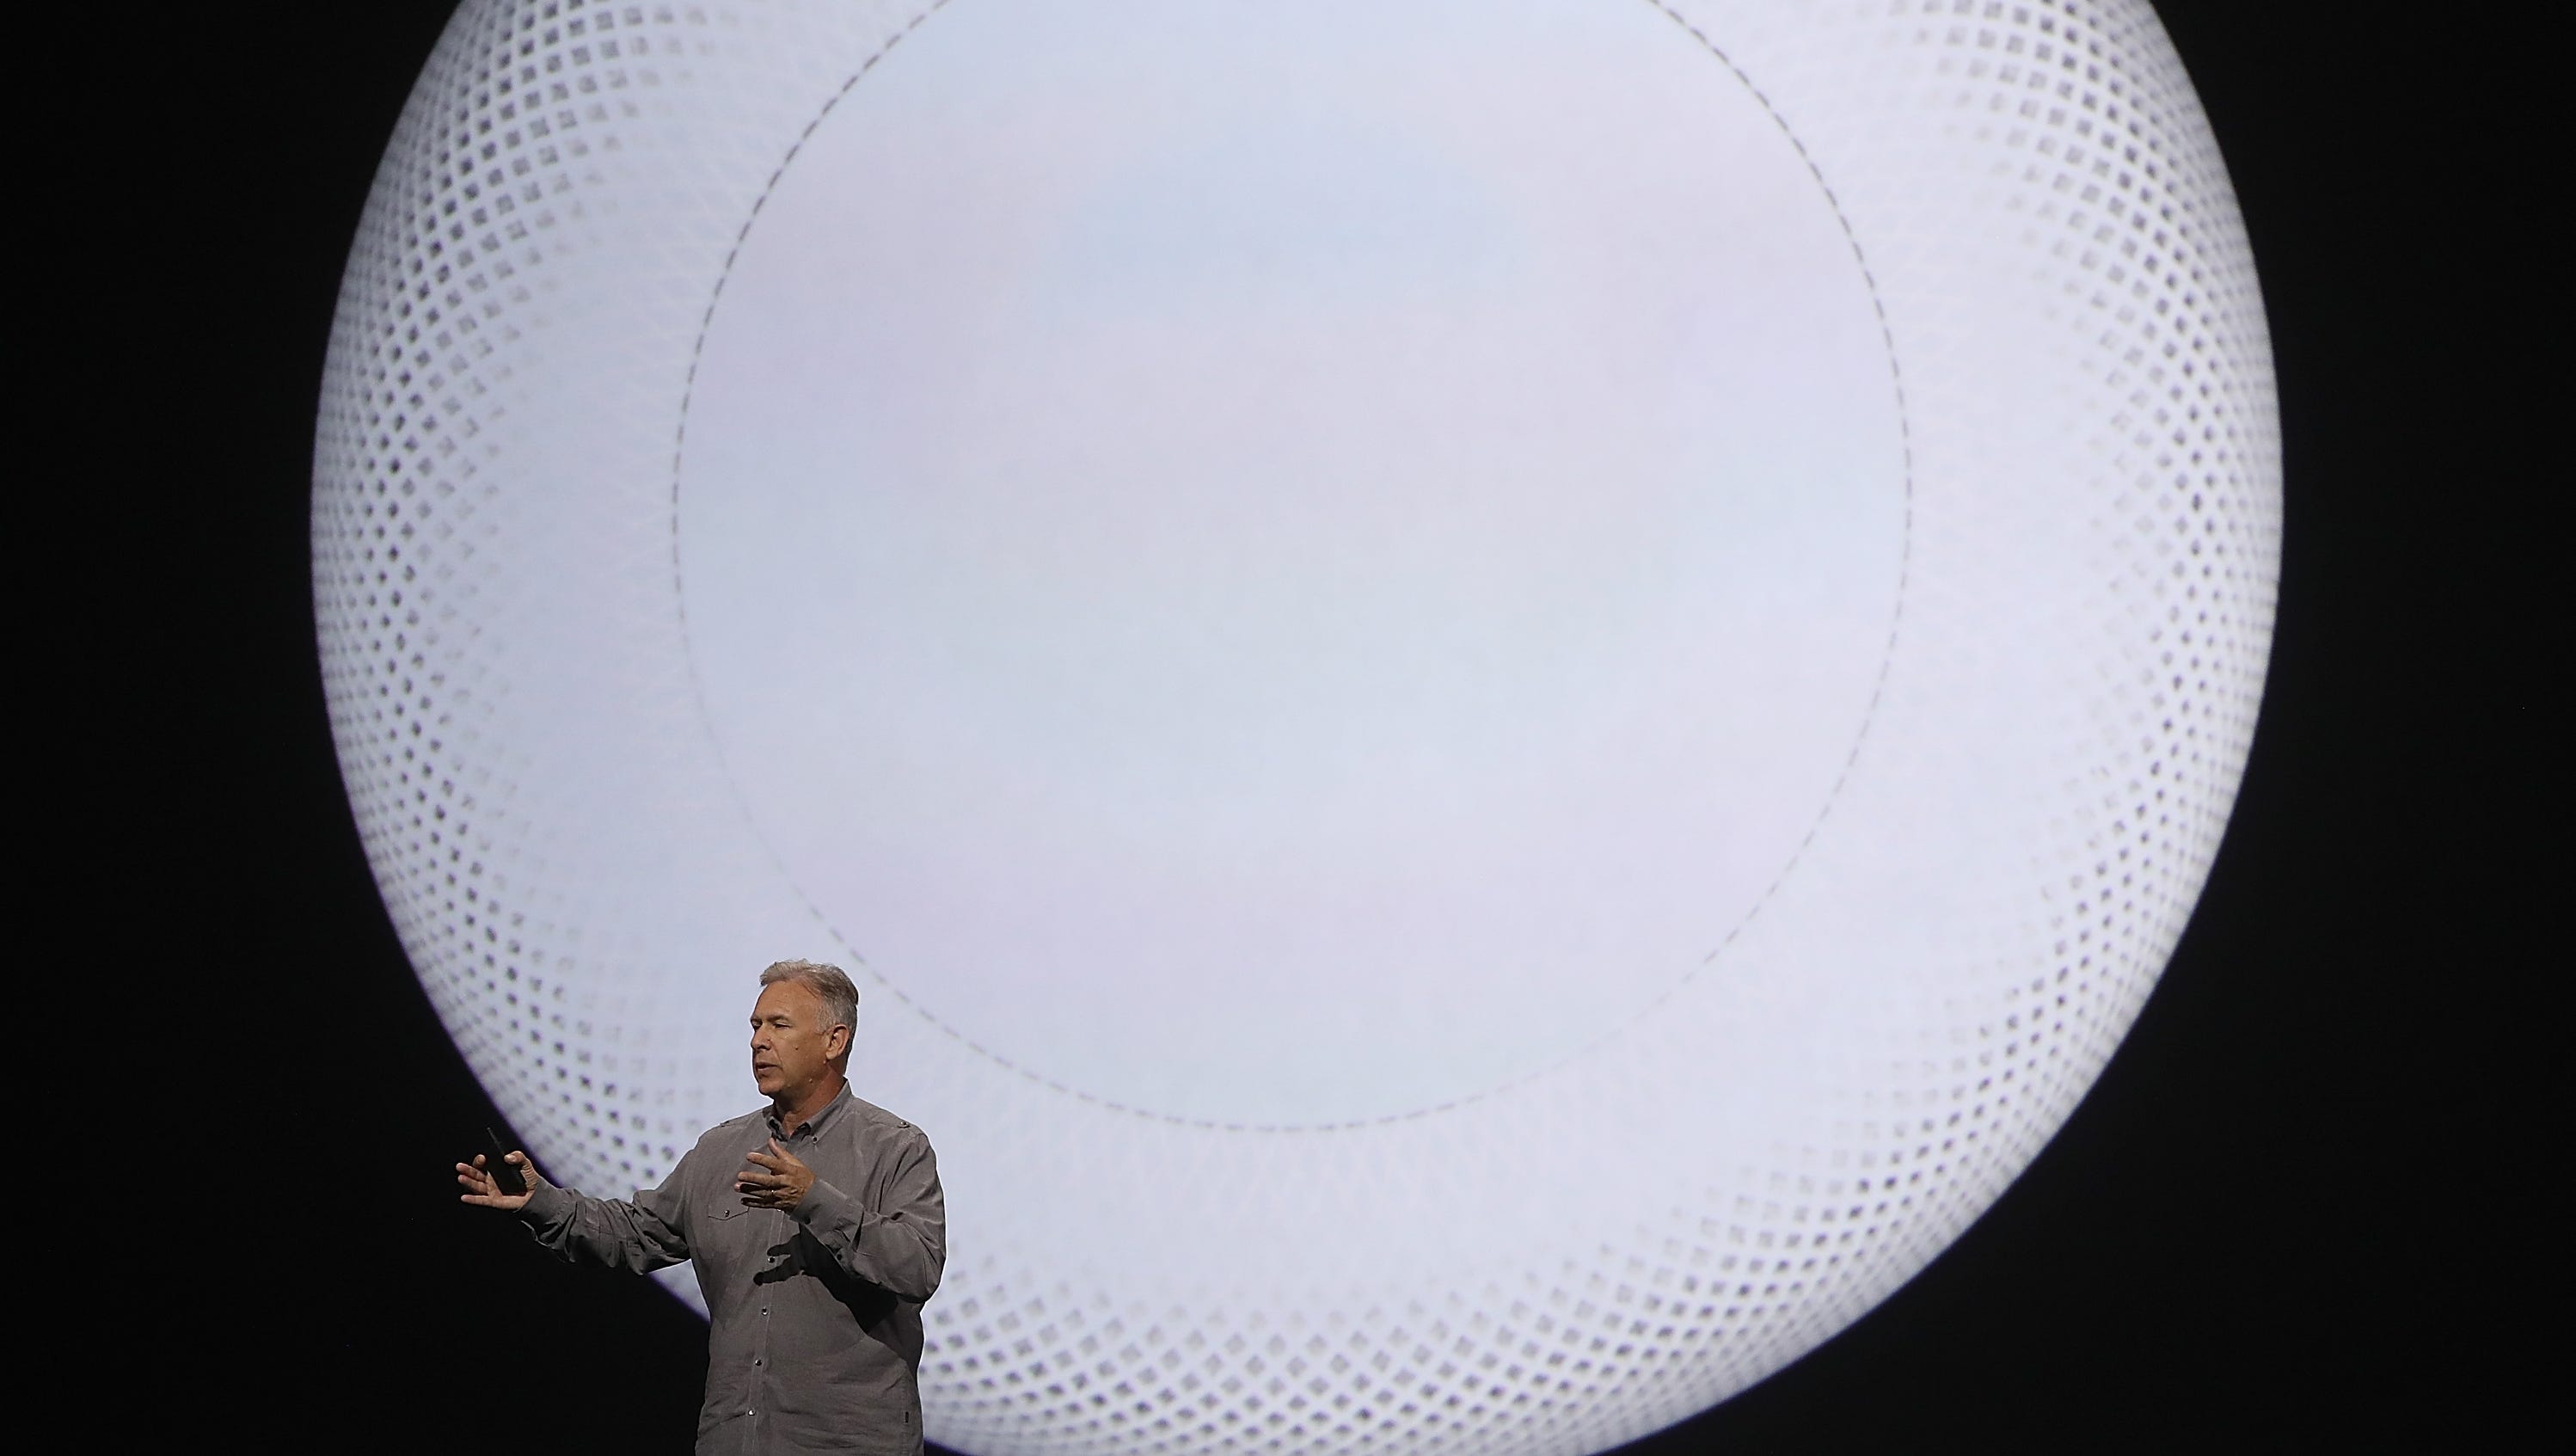 Apple's Senior Vice President of Worldwide Marketing Phil Schiller announces Apple's latest product, HomePod, a wireless speaker device, during the opening keynote address the 2017 Apple Worldwide Developer Conference (WWDC) at the San Jose Convention Center on June 5, 2017 in San Jose, Calif.